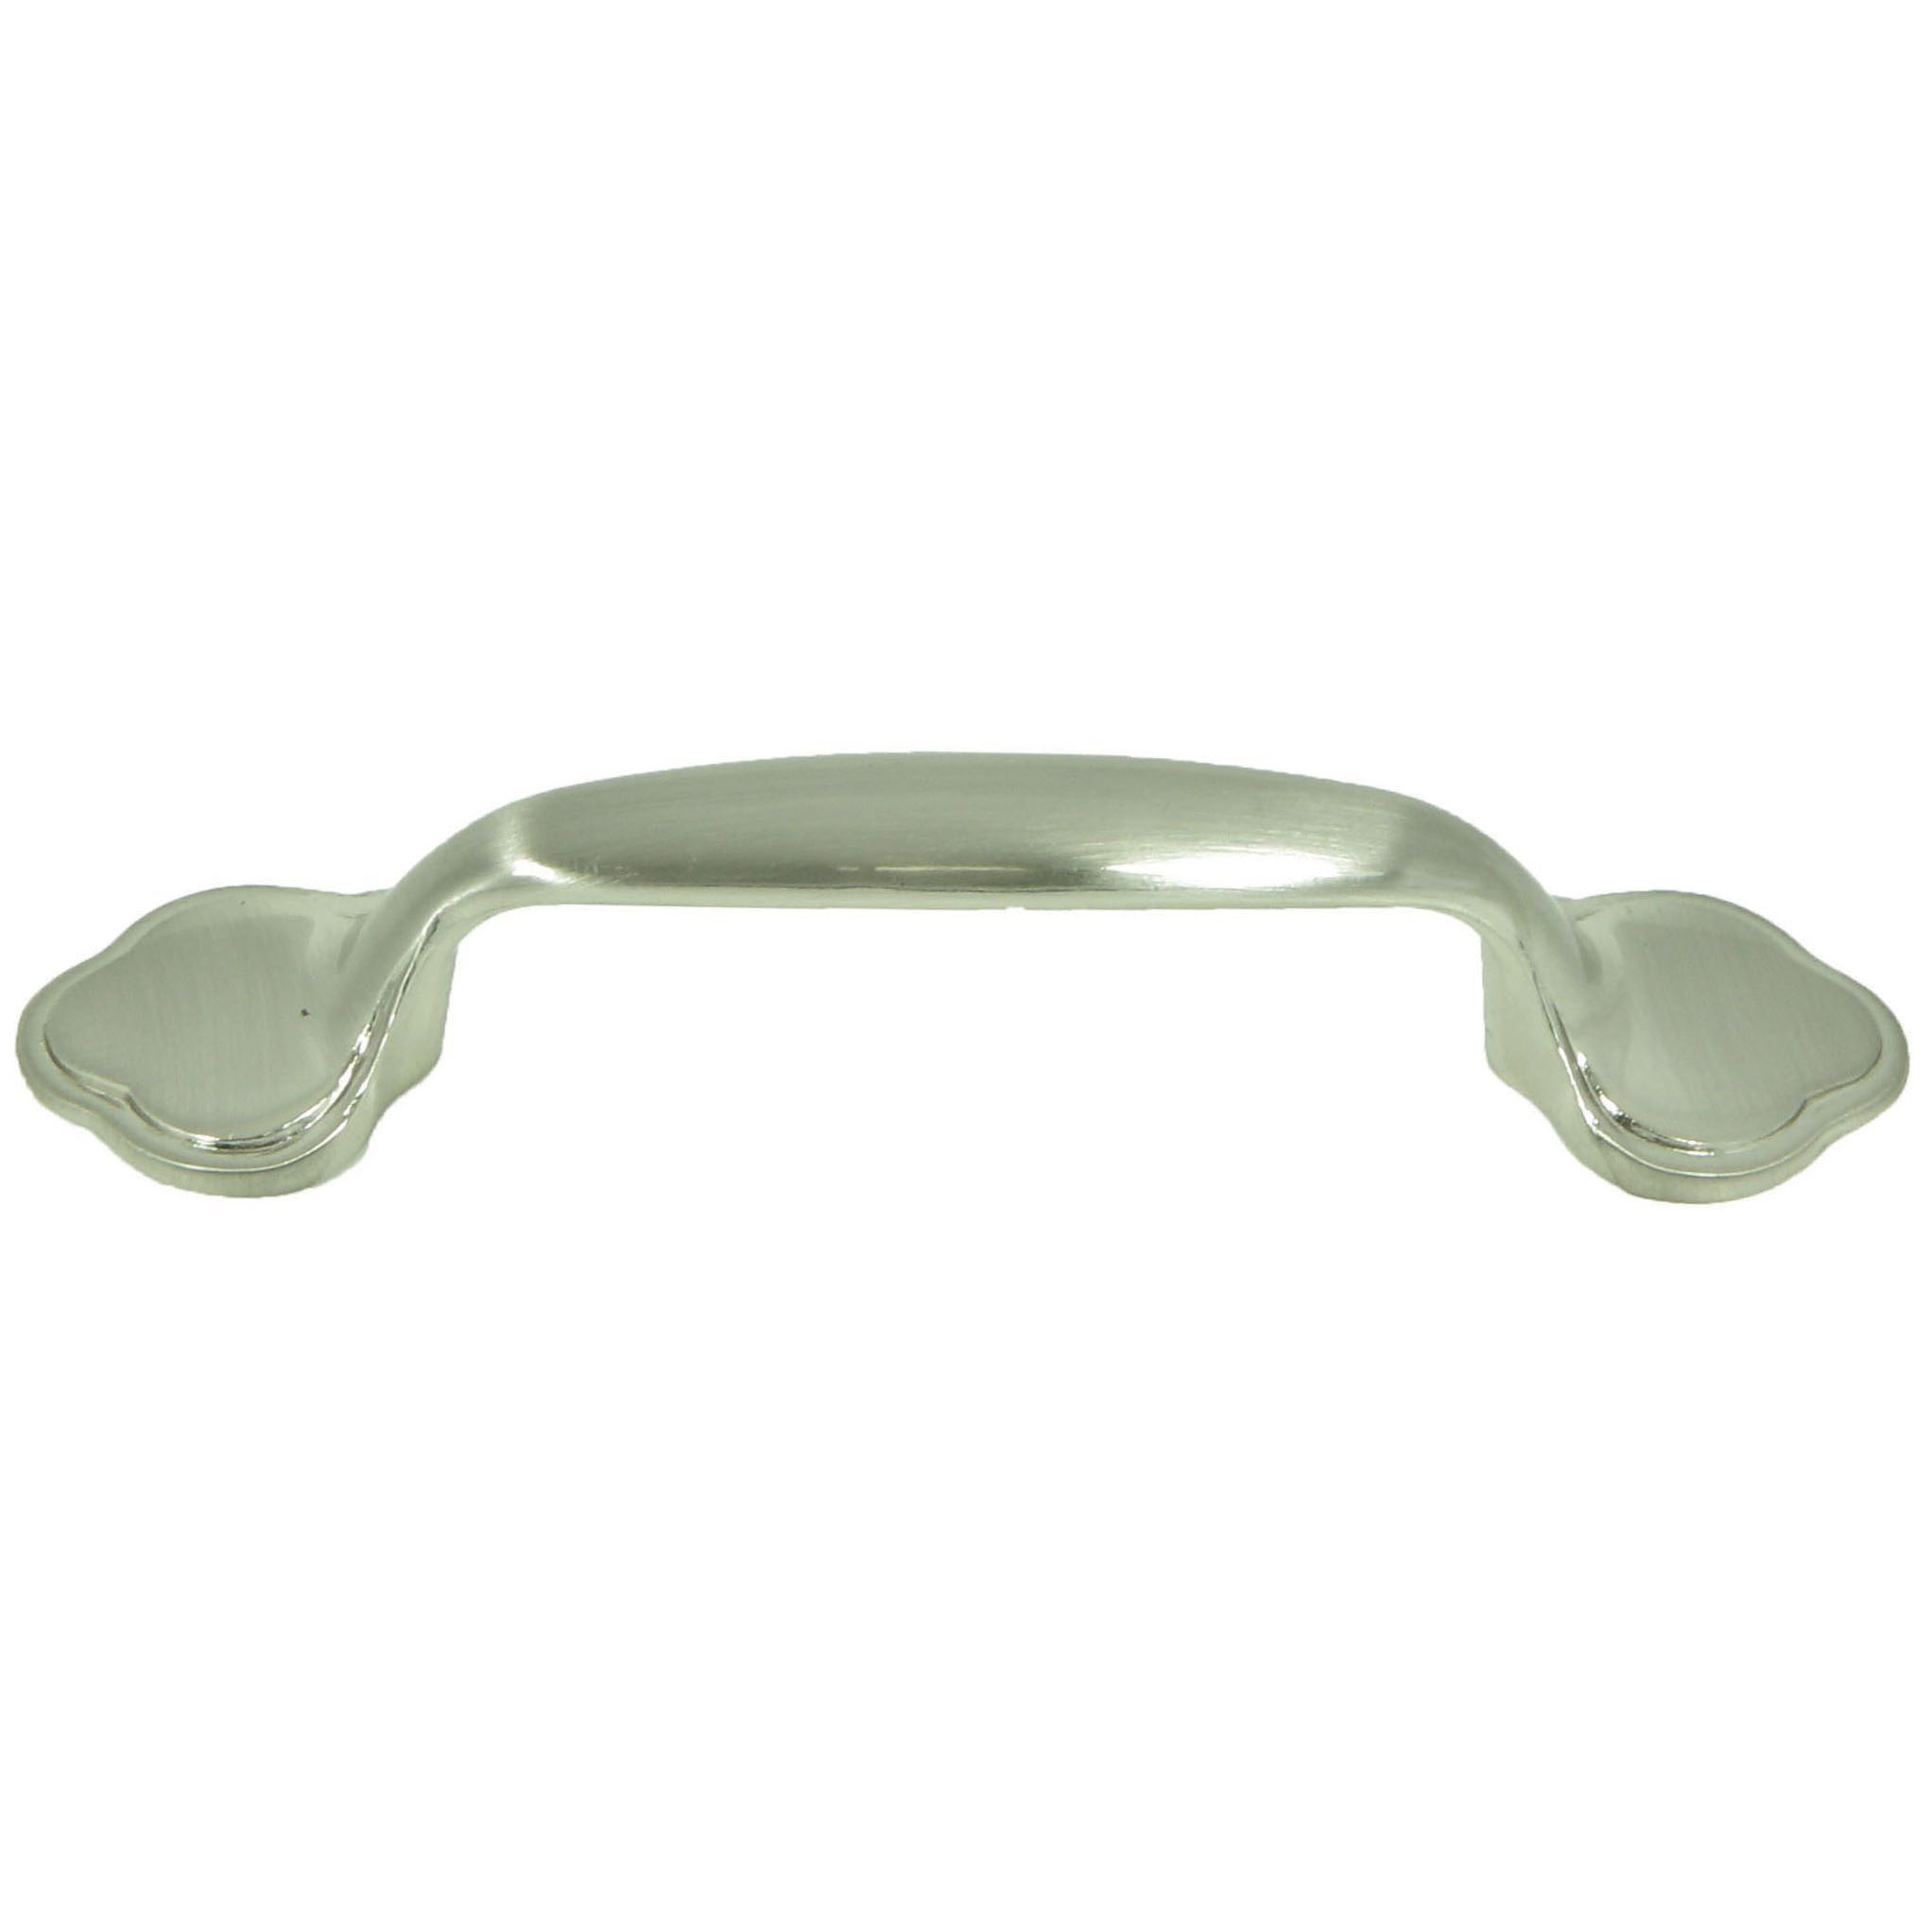 Chateau Cabinet Pull in Satin Nickel 1 pc